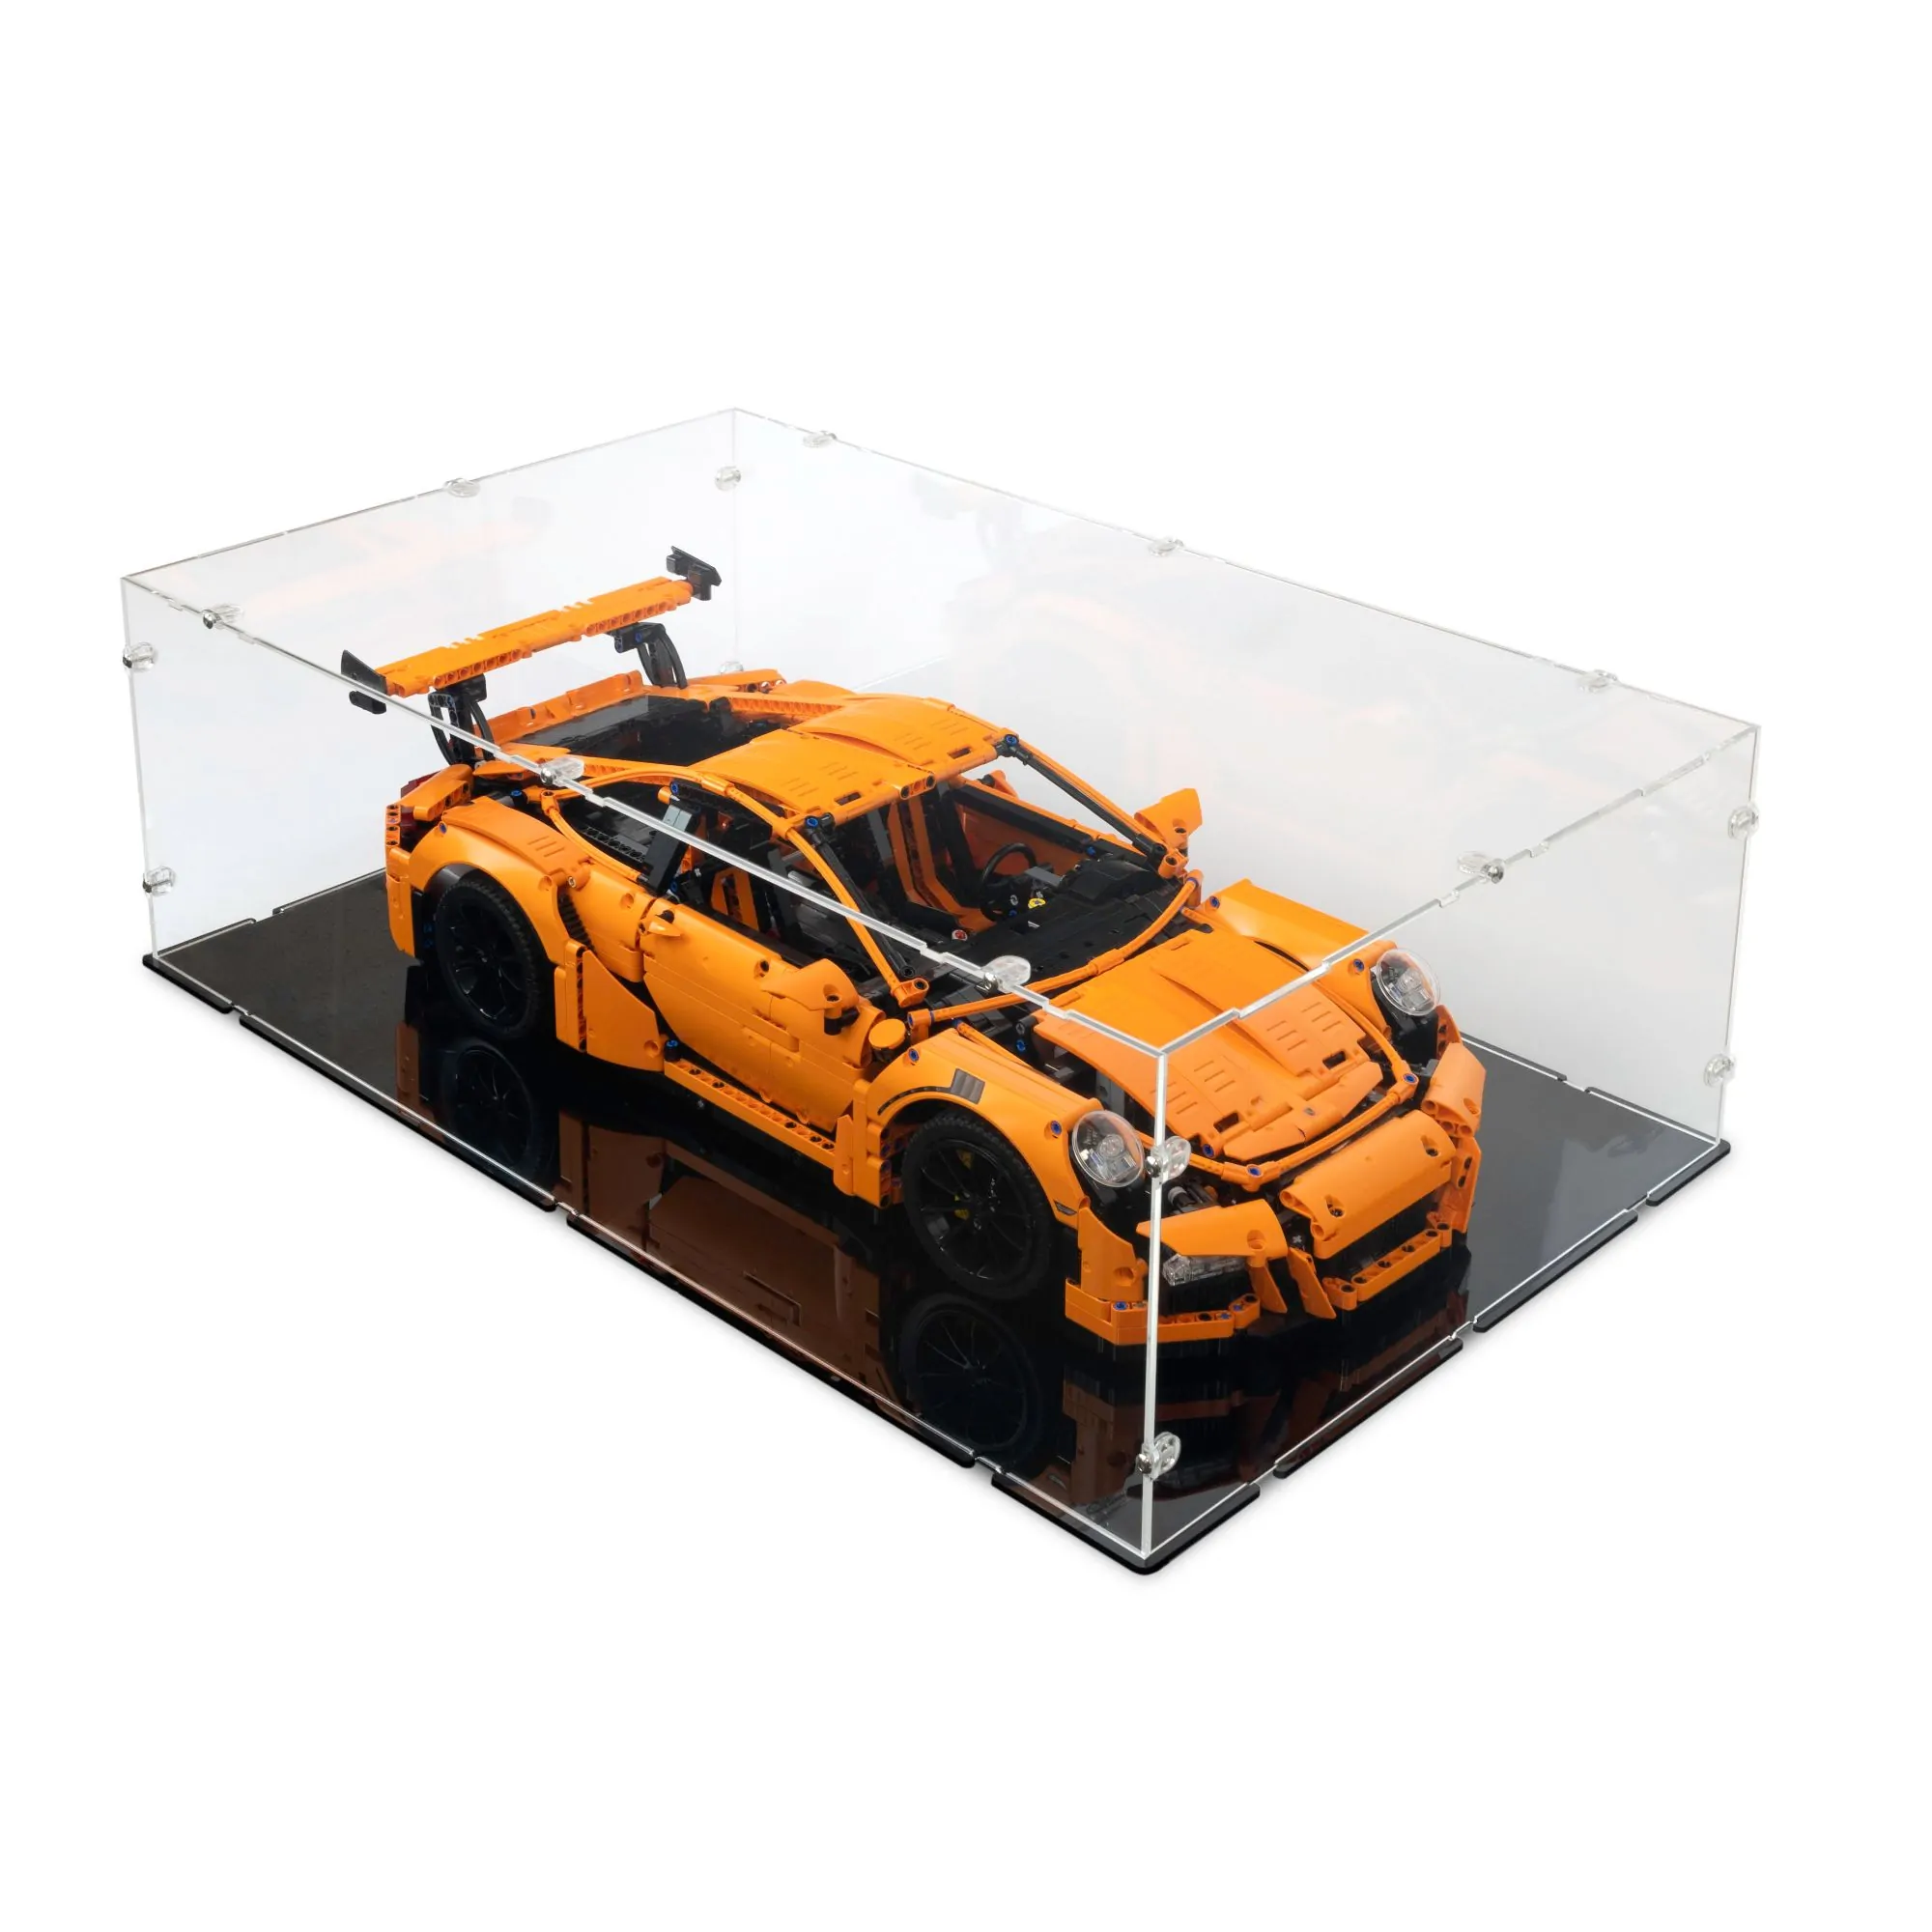 Display stand for LEGO® Technic: Porsche 911 GT3 RS (42056